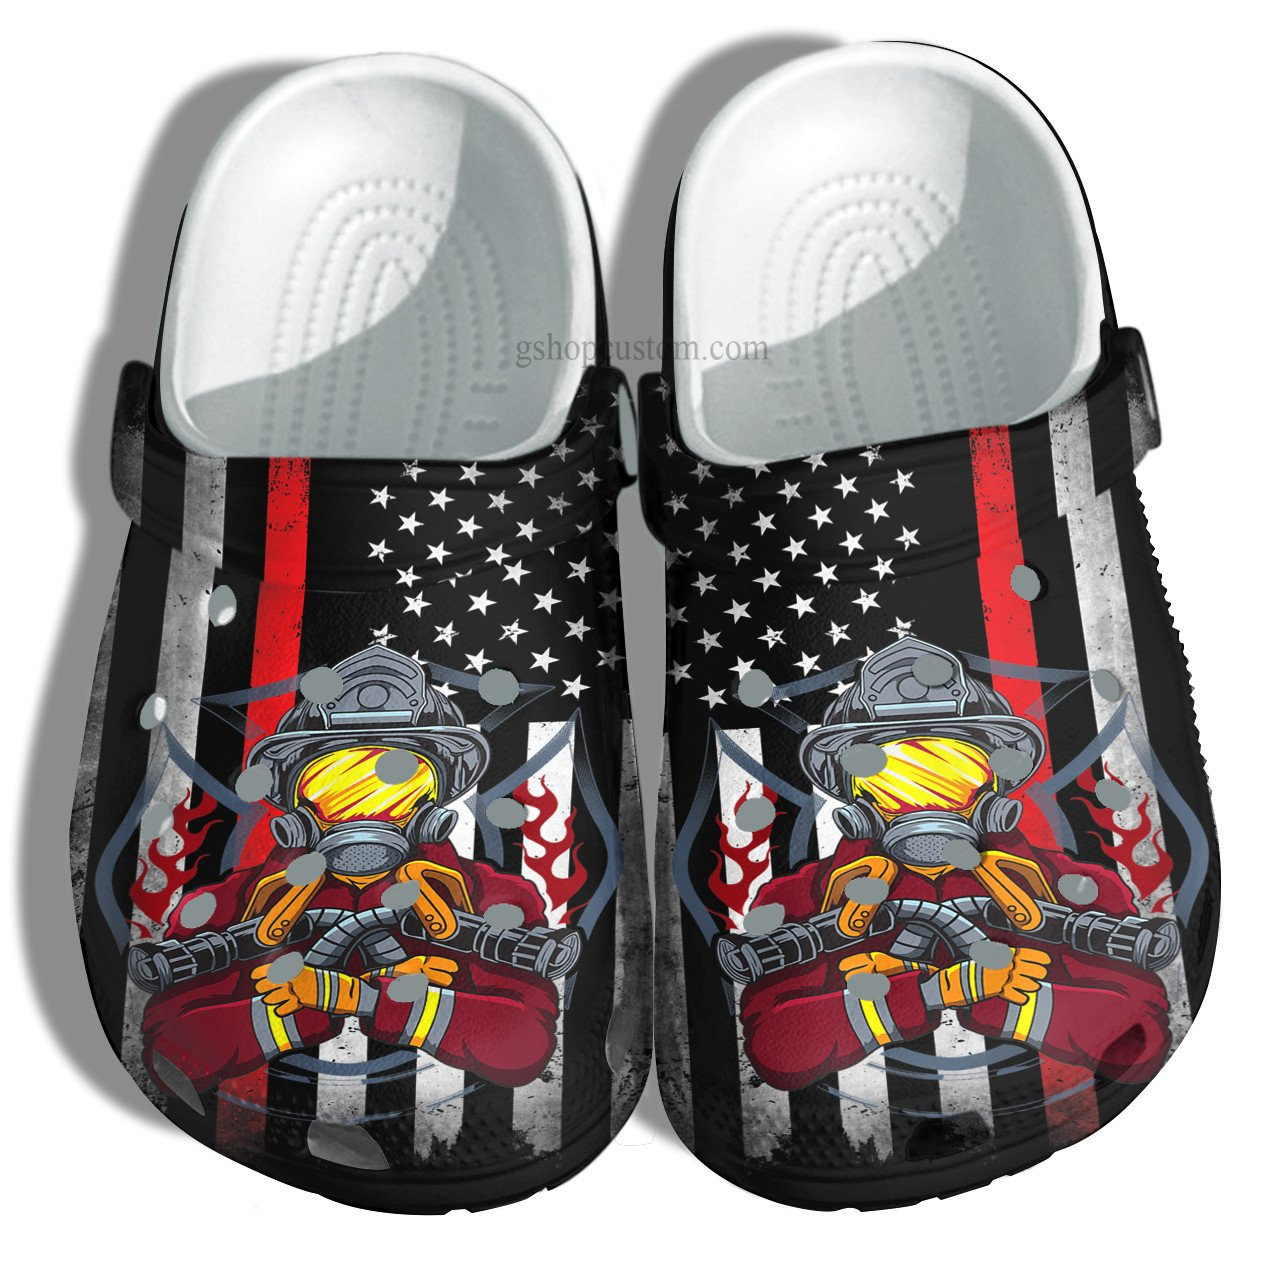 Firefighter Usa Flag Crocs Shoes - Firefighter Army Crocs Shoes Croc Clogs Gift Men Women Father Day